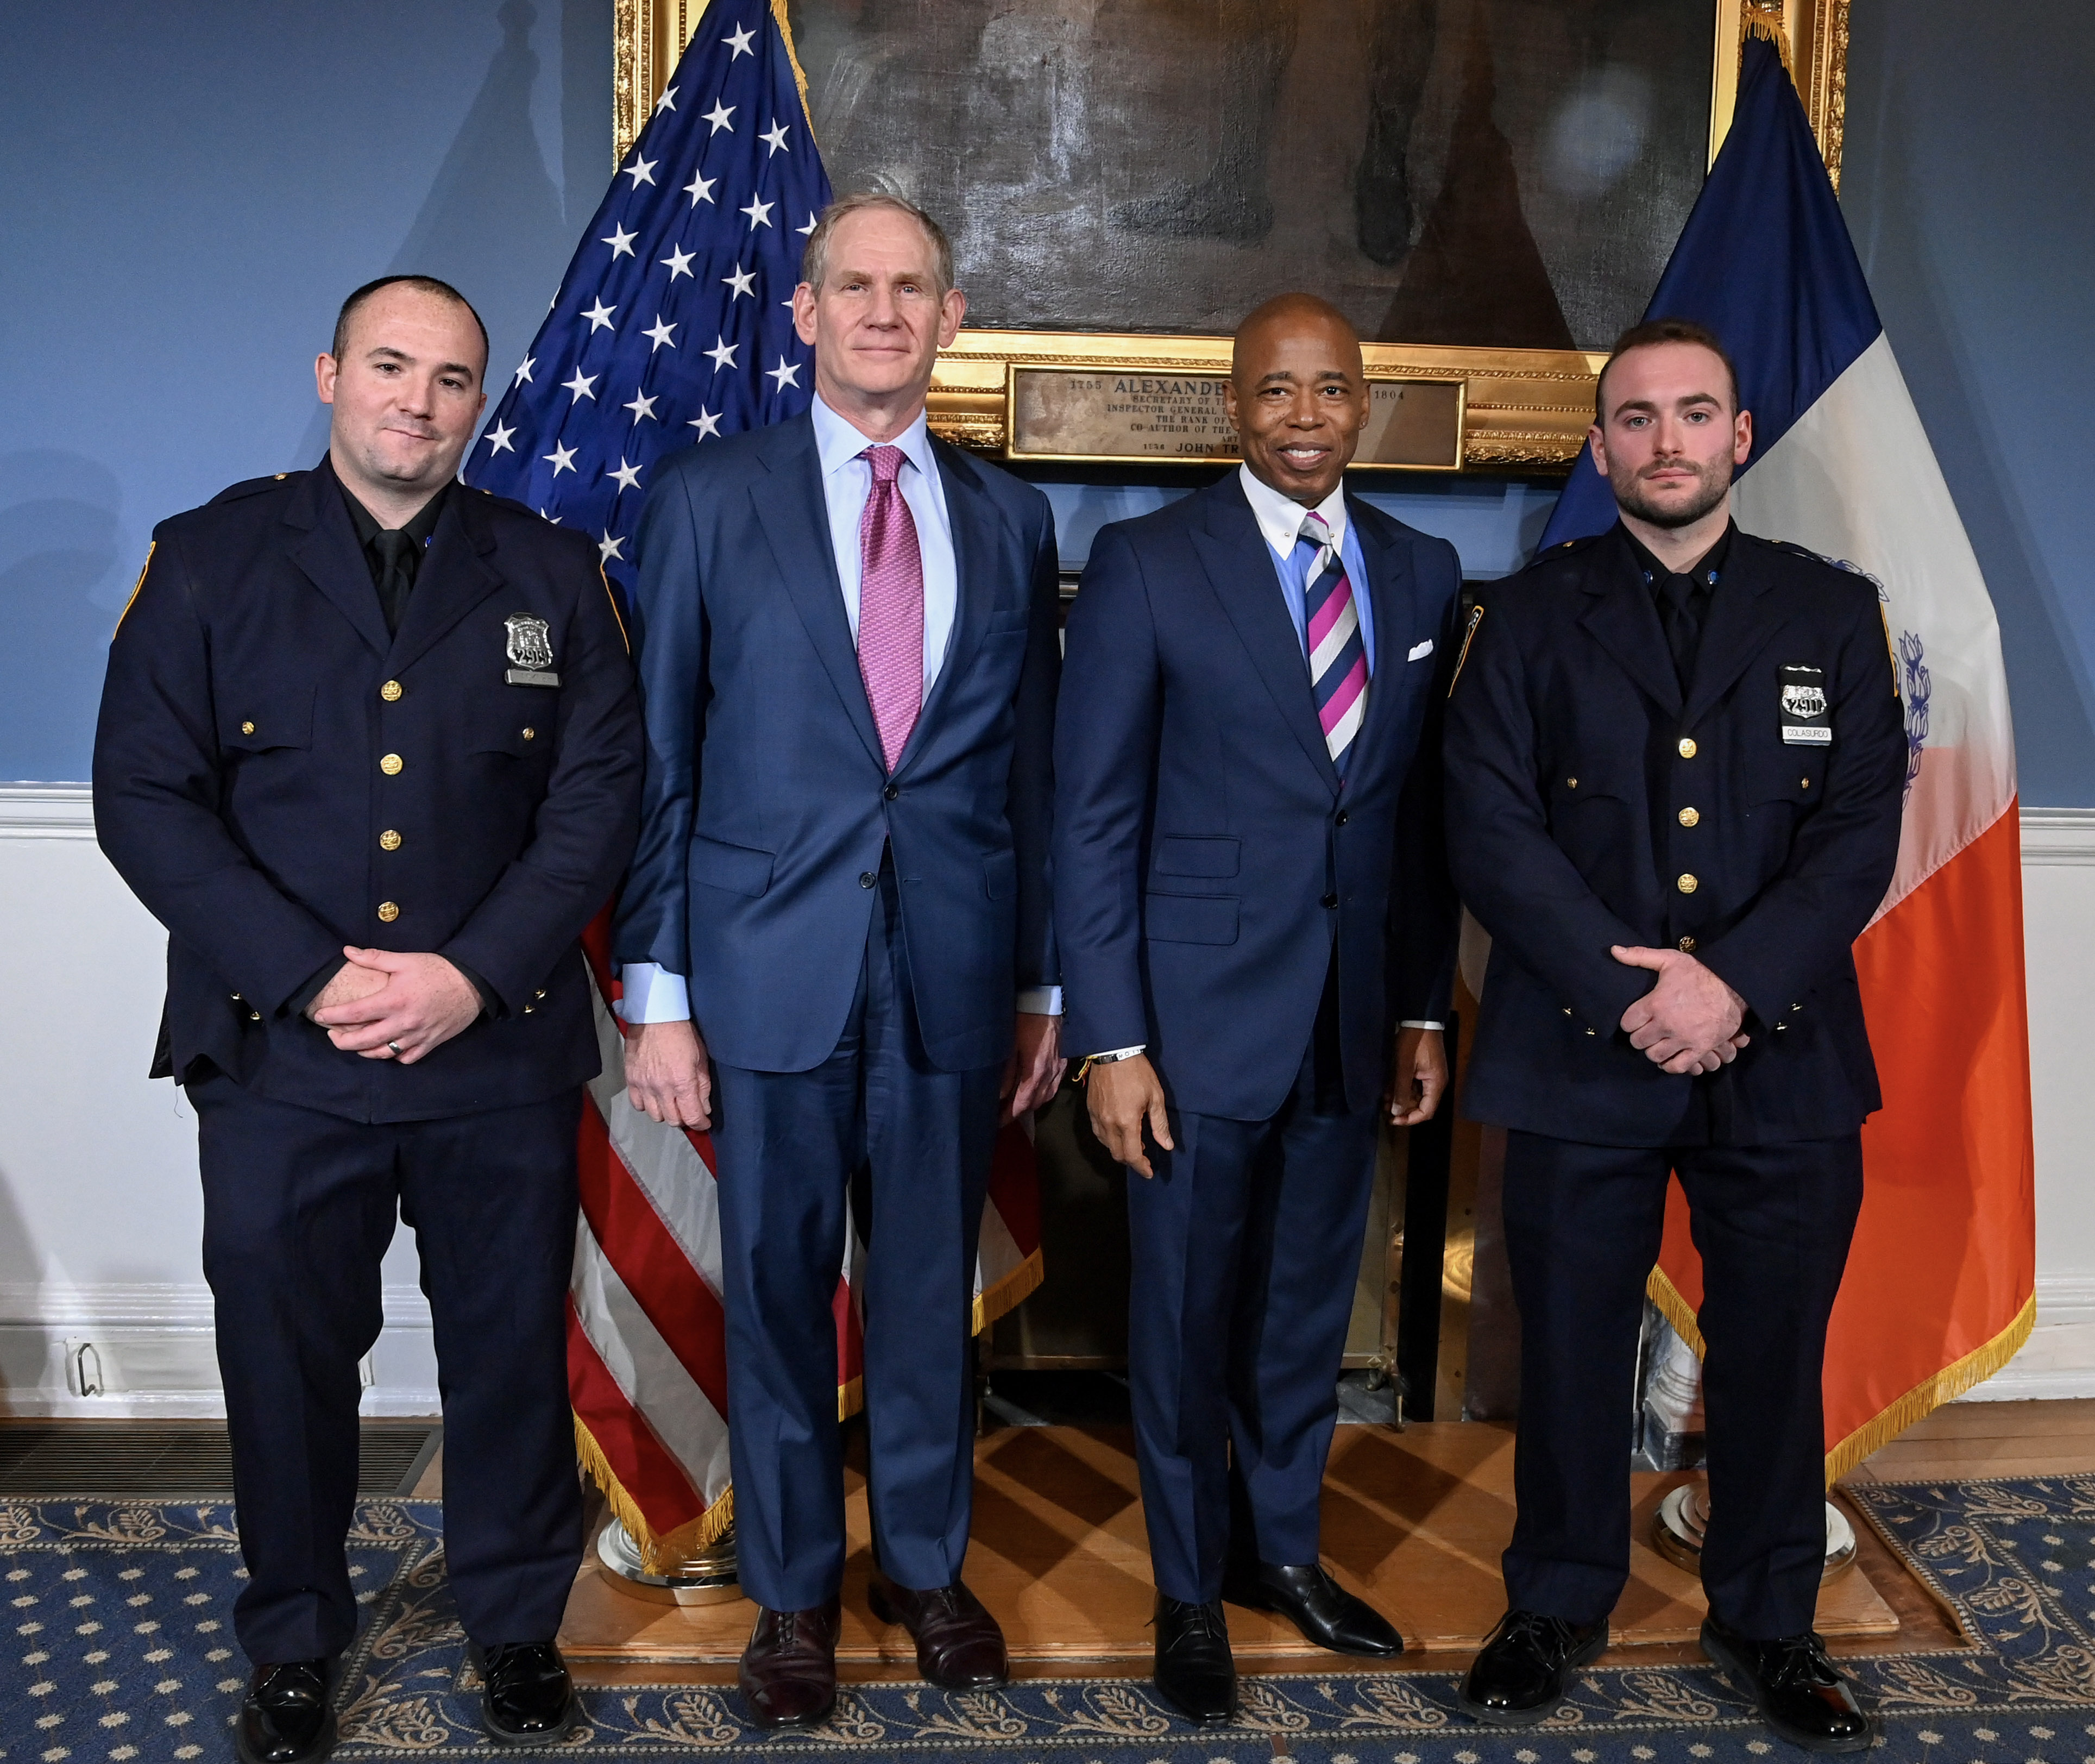 Metropolitan Transportation Authority (MTA) Chair and CEO Janno Lieber and MTA police officers today joined Mayor Eric Adams, New York City Police Commissioner Keechant Sewell, other law enforcement officials and Jewish community leaders at City Hall to discuss coordinated efforts that averted a potential attack on the Jewish community in New York City this past weekend. 